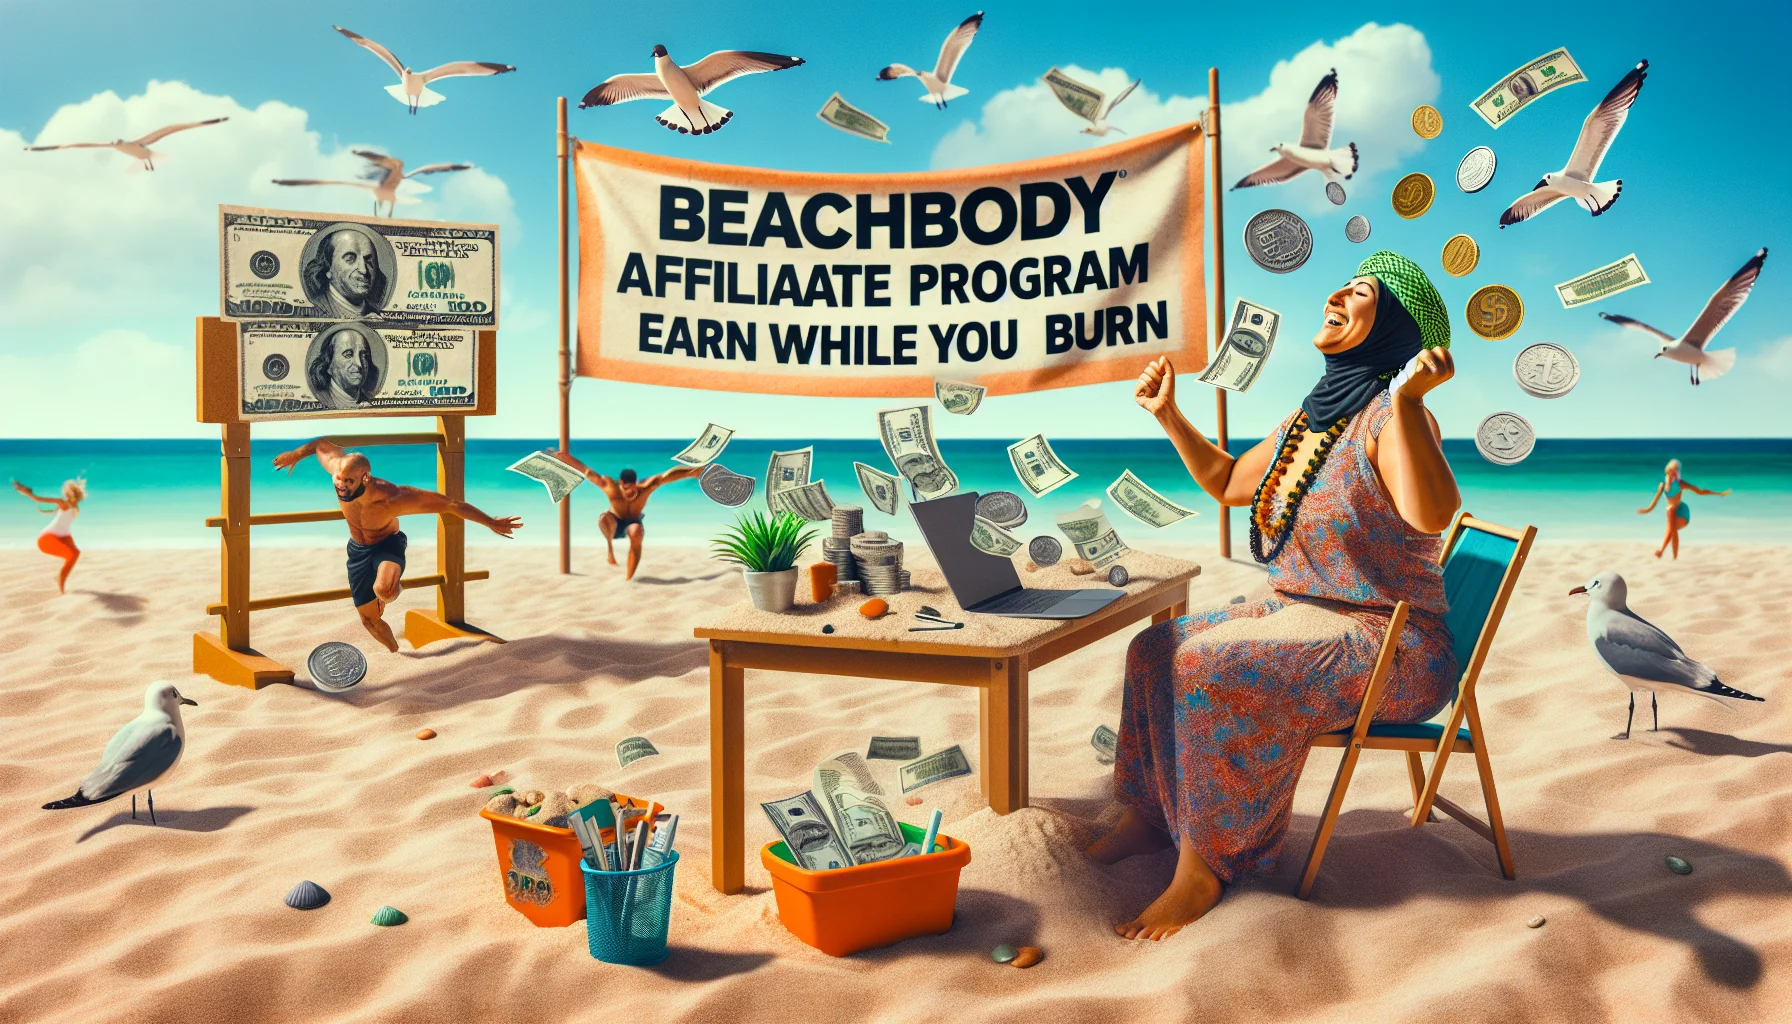 Picture a humorous, life-like scene depicting an affiliate program related to beachbody fitness. Imagine a playfully staged makeshift office set up on a sandy sunny beach. A middle-eastern woman in beach attire, energetically doing exercise moves while working on a laptop that's hovering on a sandy desk. Lots of coins and dollar bills are emerging from the screen of the laptop, symbolizing the concept of earning money online. Sand dollars are replacing conventional currency. A banner overhead displays 'Beachbody Affiliate Program Earn While You Burn’ as a catchy slogan. Seagulls fly in the background carrying smaller banners bearing the same message.